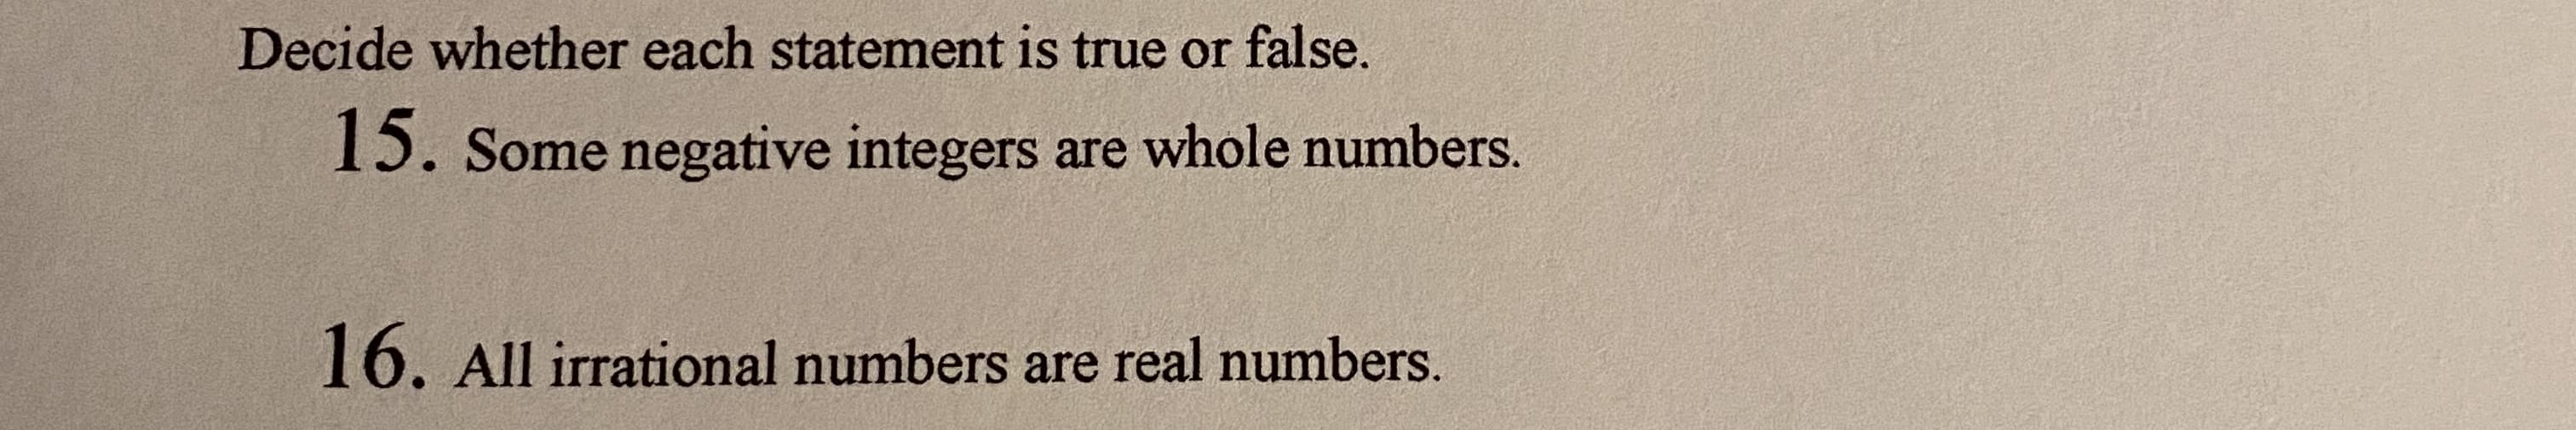 Decide whether each statement is true or false.
15. Some negative integers are whole numbers.
16. All irrational numbers are real numbers.
